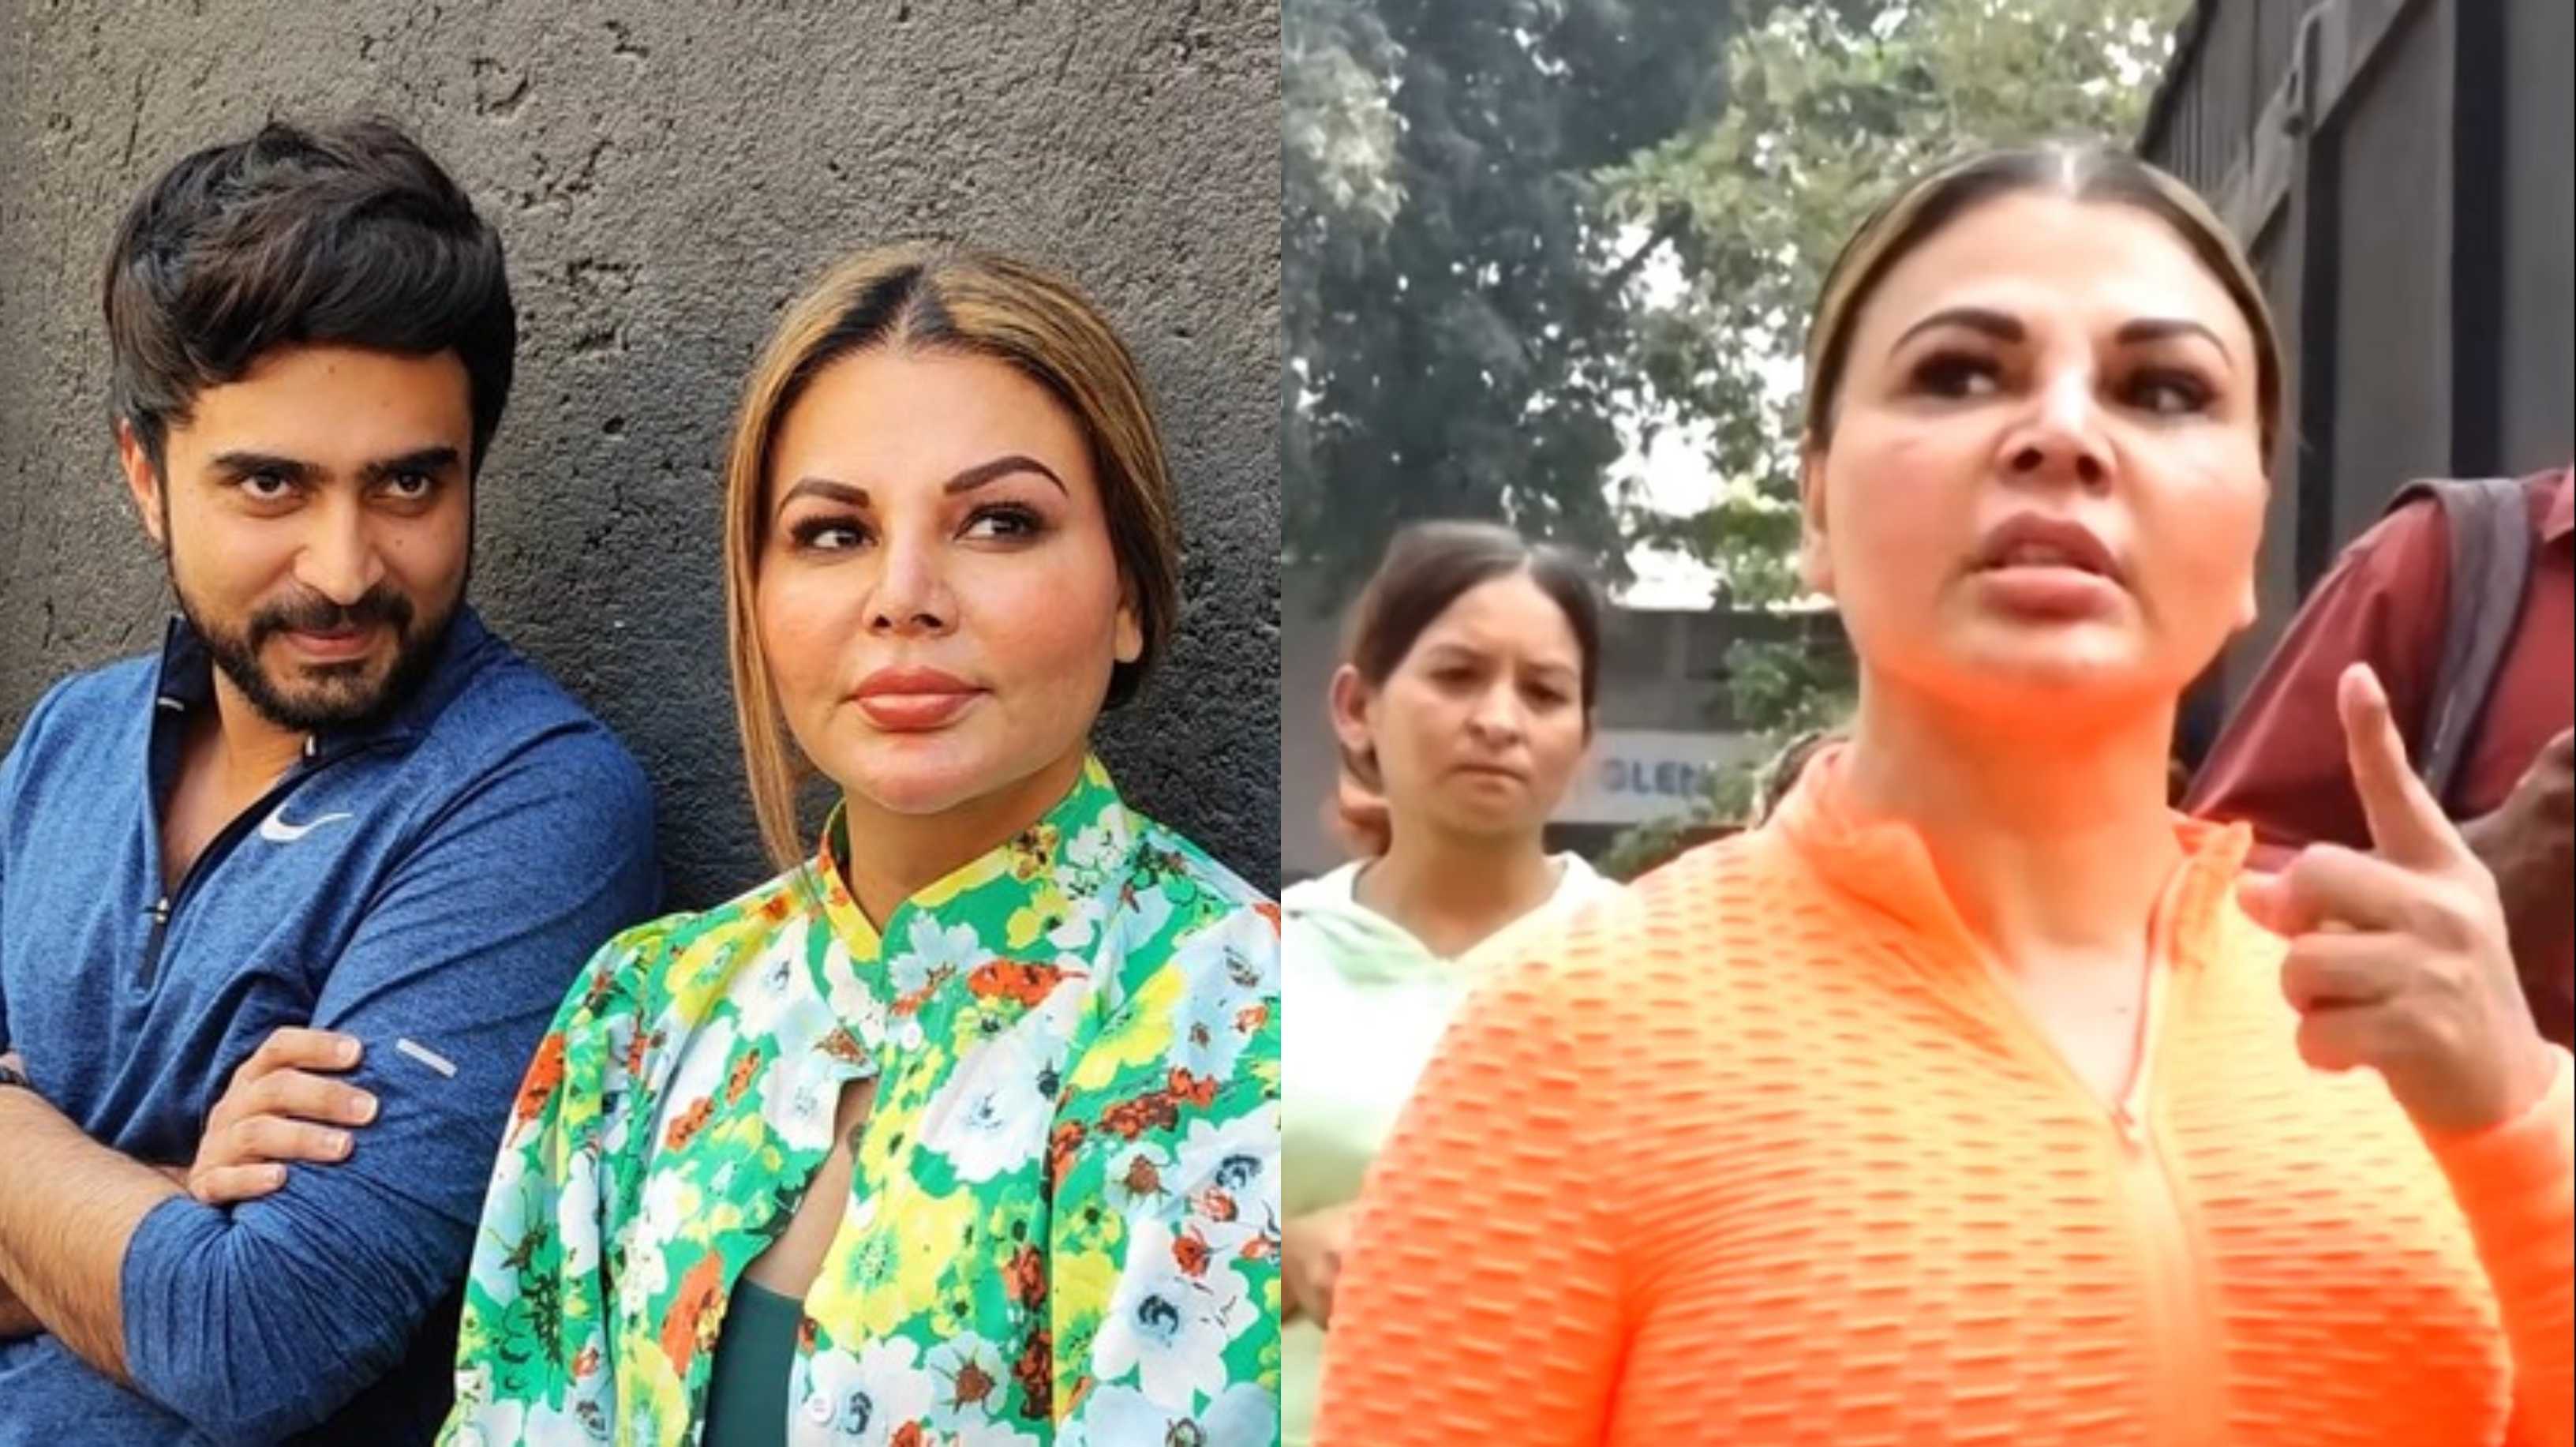 ‘Kabhi bhi palat jaati ho’: After accusing Adil of cheating, Rakhi Sawant says they will never break up; fans are confused